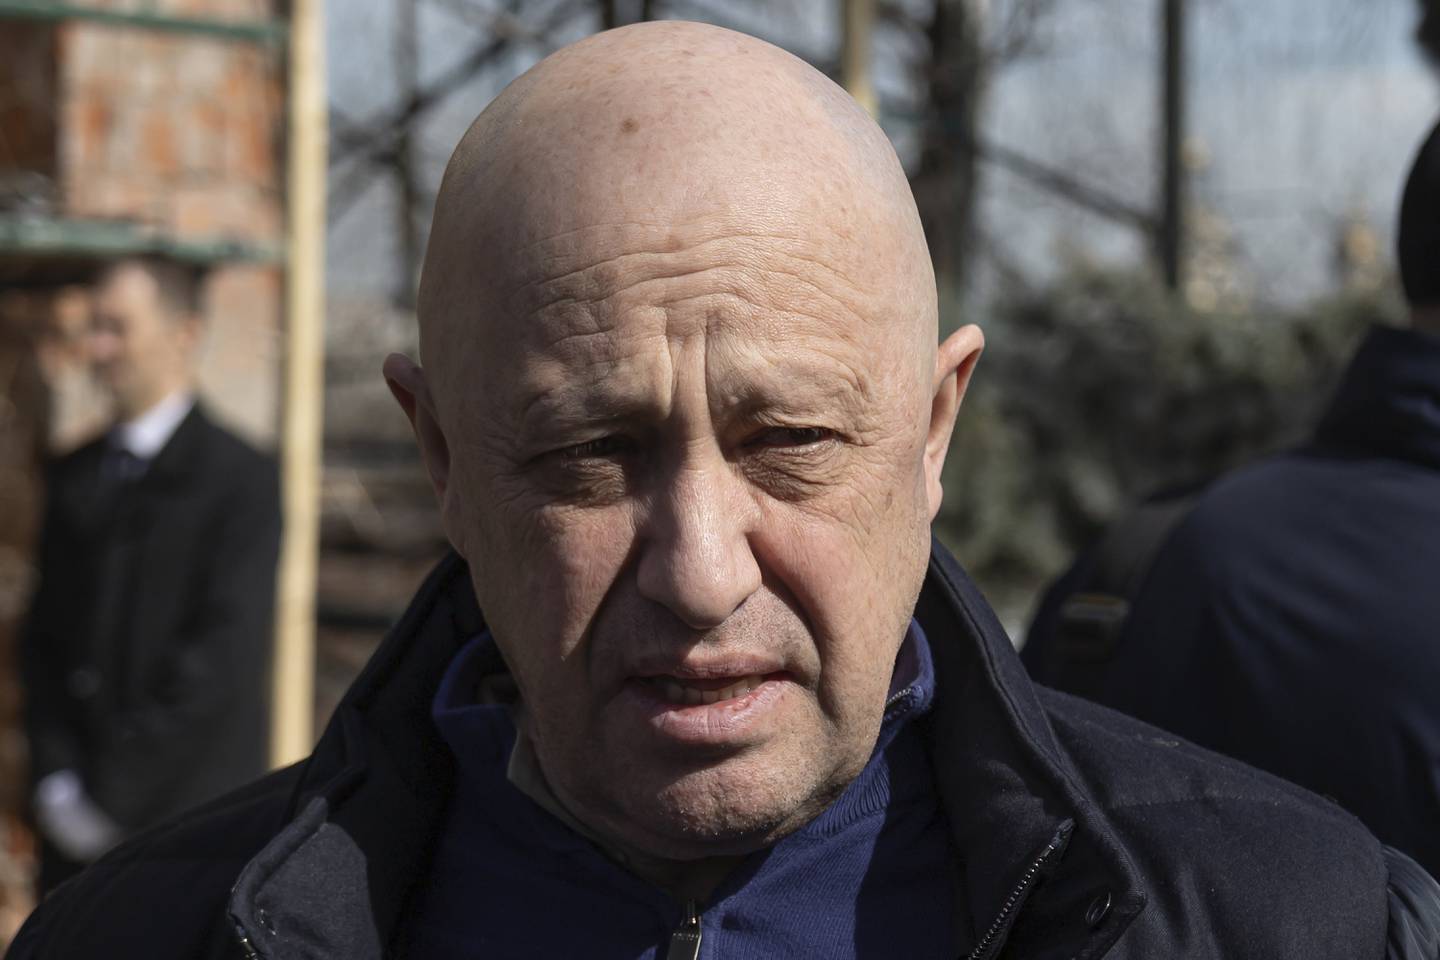 Yevgeny Prigozhin, the owner of the Wagner Group military company, arrives during a funeral ceremony at the Troyekurovskoye cemetery in Moscow, Russia, Saturday, April 8, 2023.